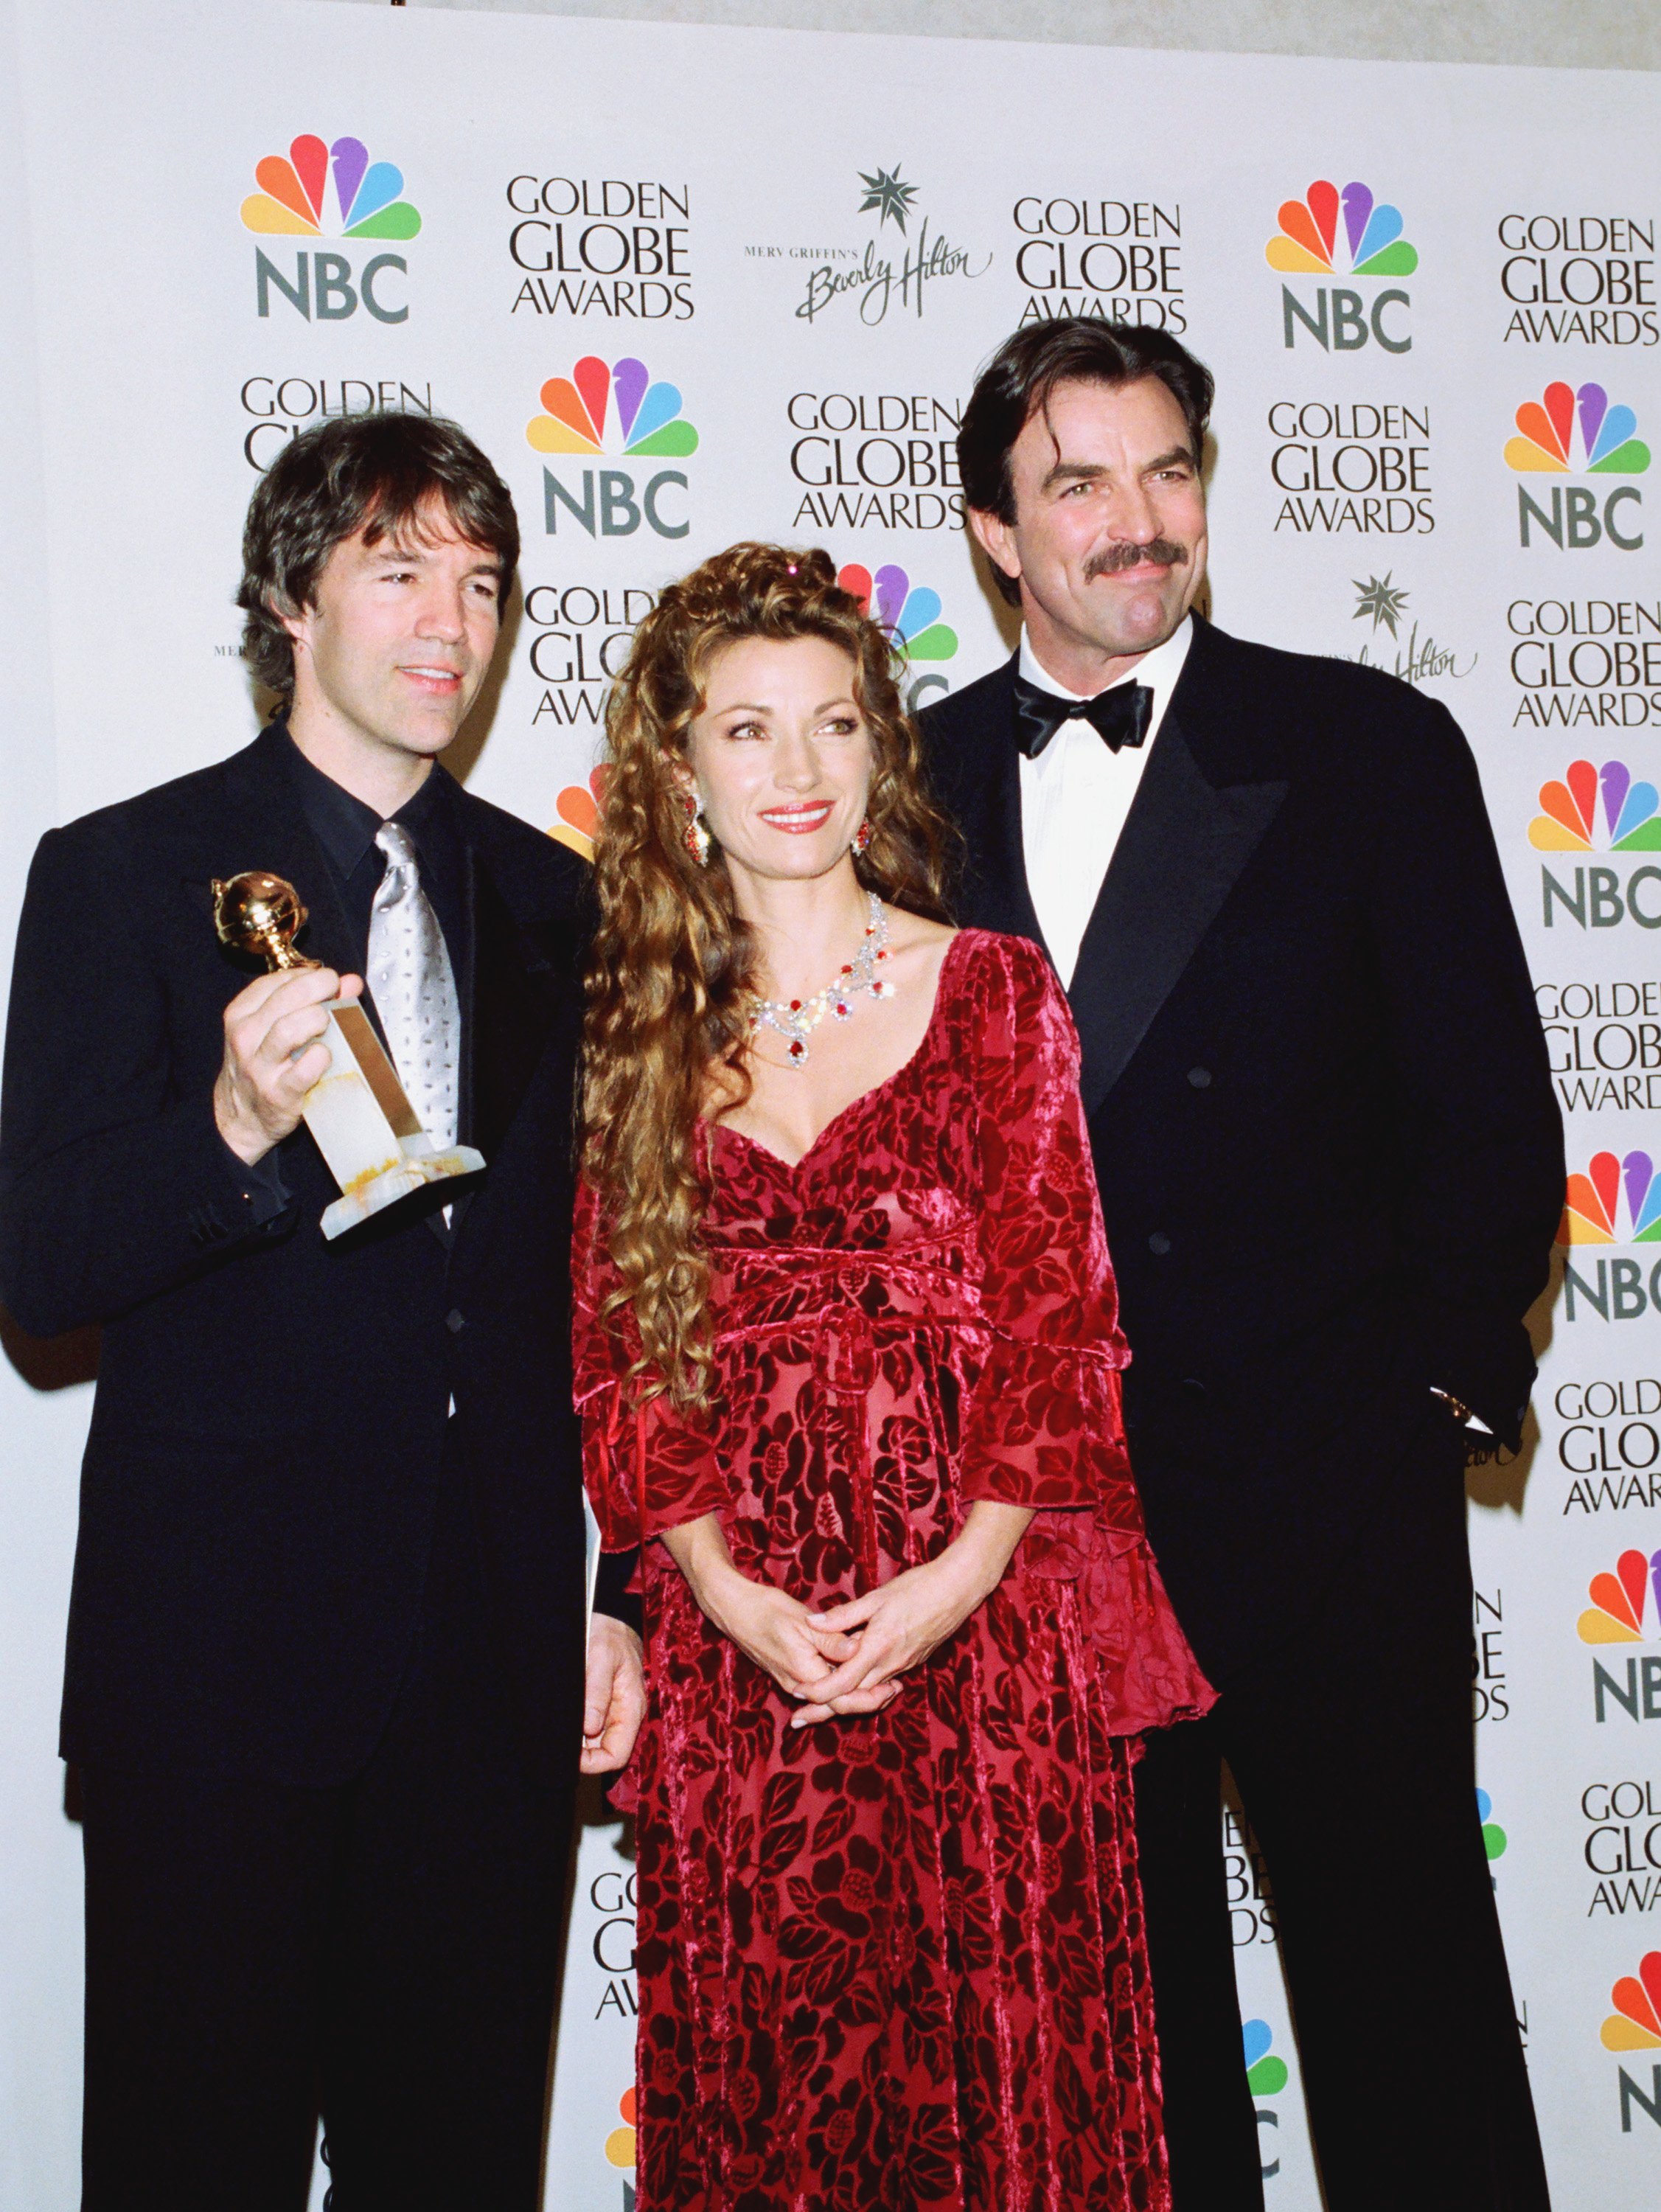 David E. Kelley, Jane Seymour, and Tom Selleck at the 56th Annual Golden Globes Awards on January 24, 1999 | Source: Getty Images